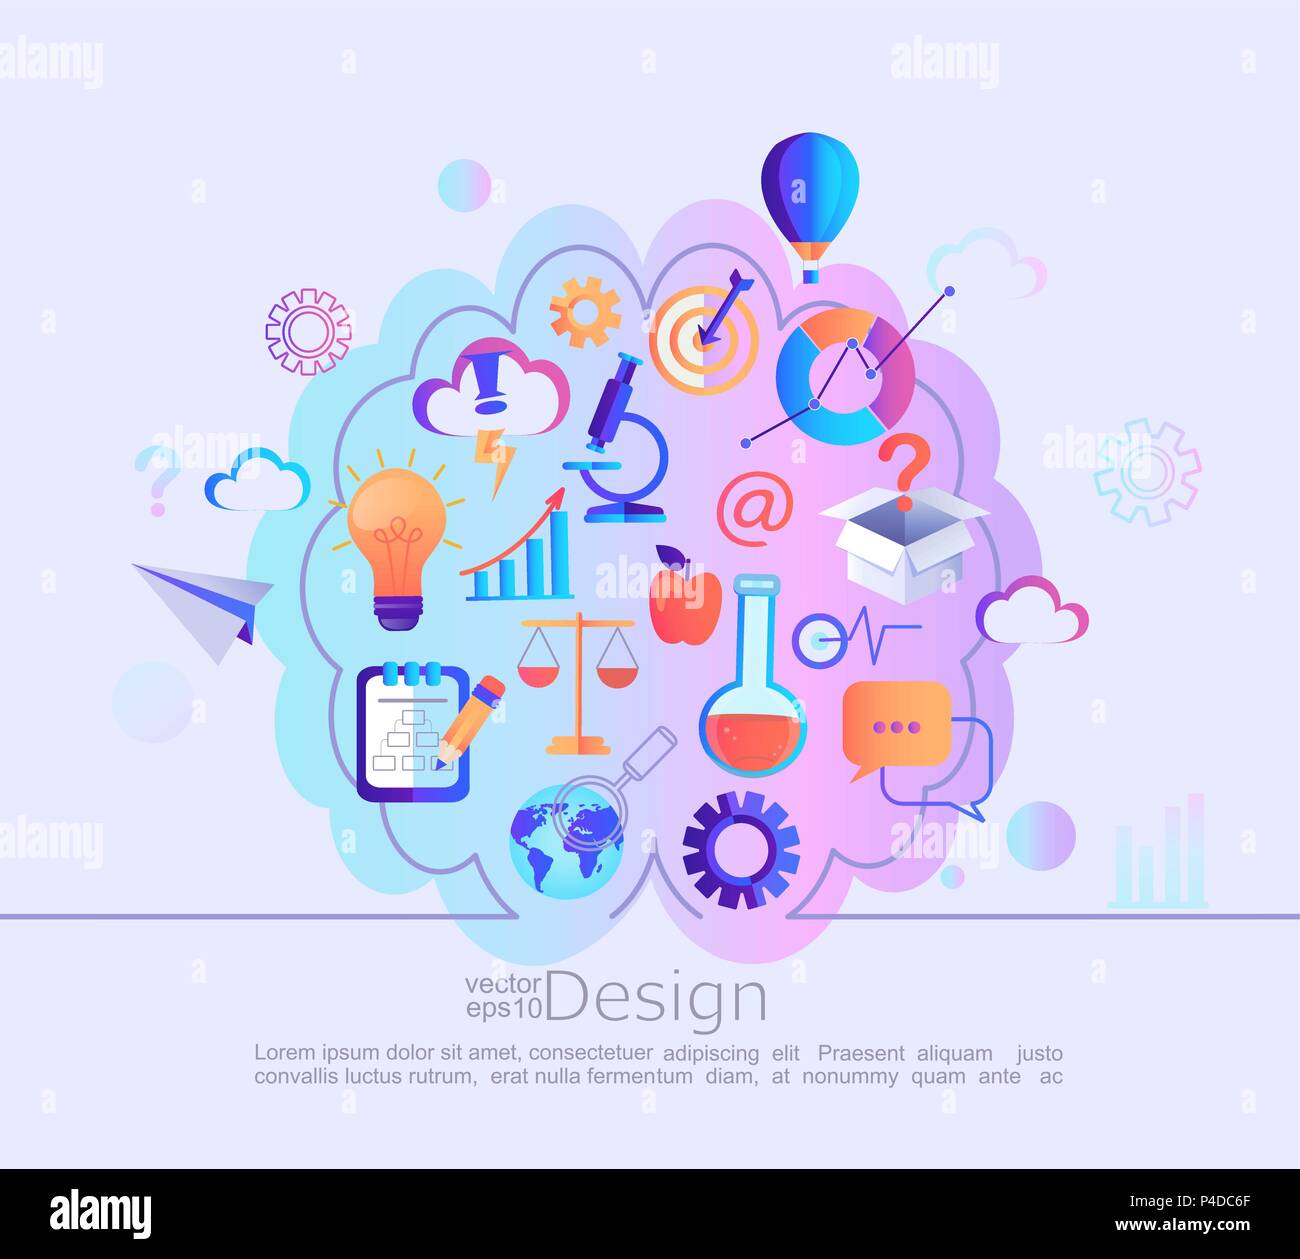 Creative infographic concept of different knowledges in our mind. Different signs and symbols in our head after education. Color division into the left and right half of the brain.Vector illustration. Stock Vector